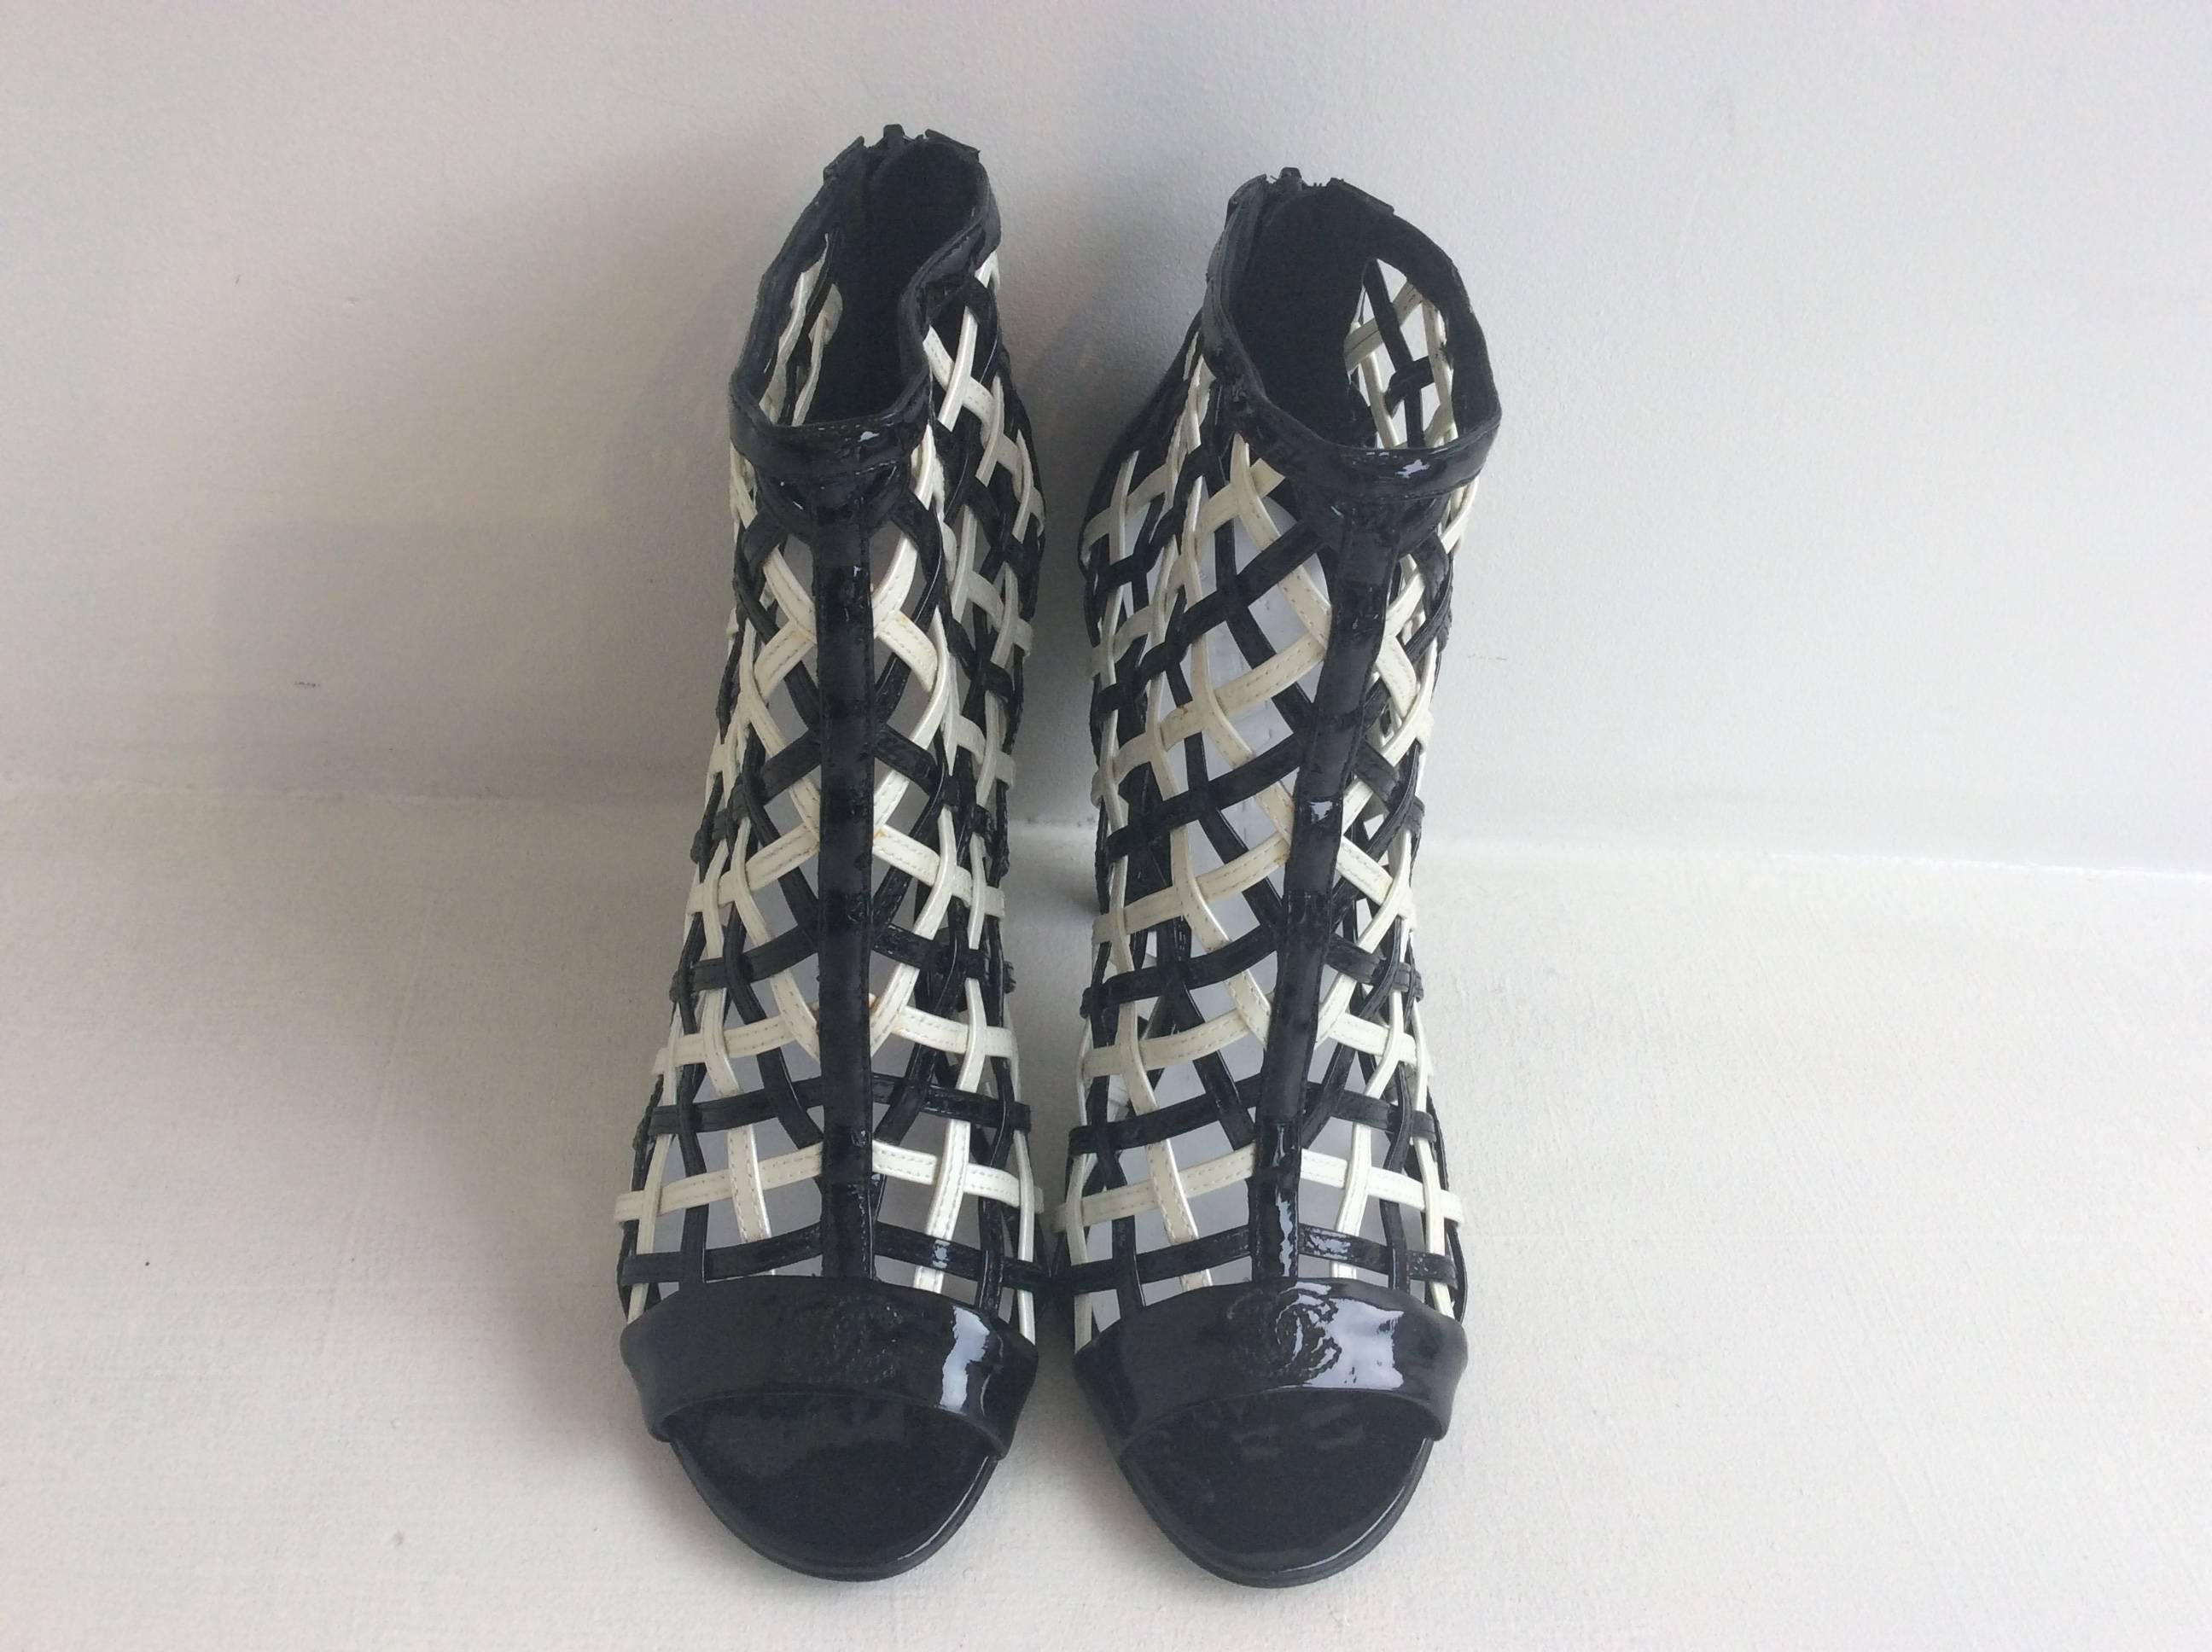 Chanel black and white patent open toe caged booties with the iconic stitched double CC on the toe band. They have a sculptural black plastic spiral 4 1/4in heel. The closure is a 3.5in zipper in the back.